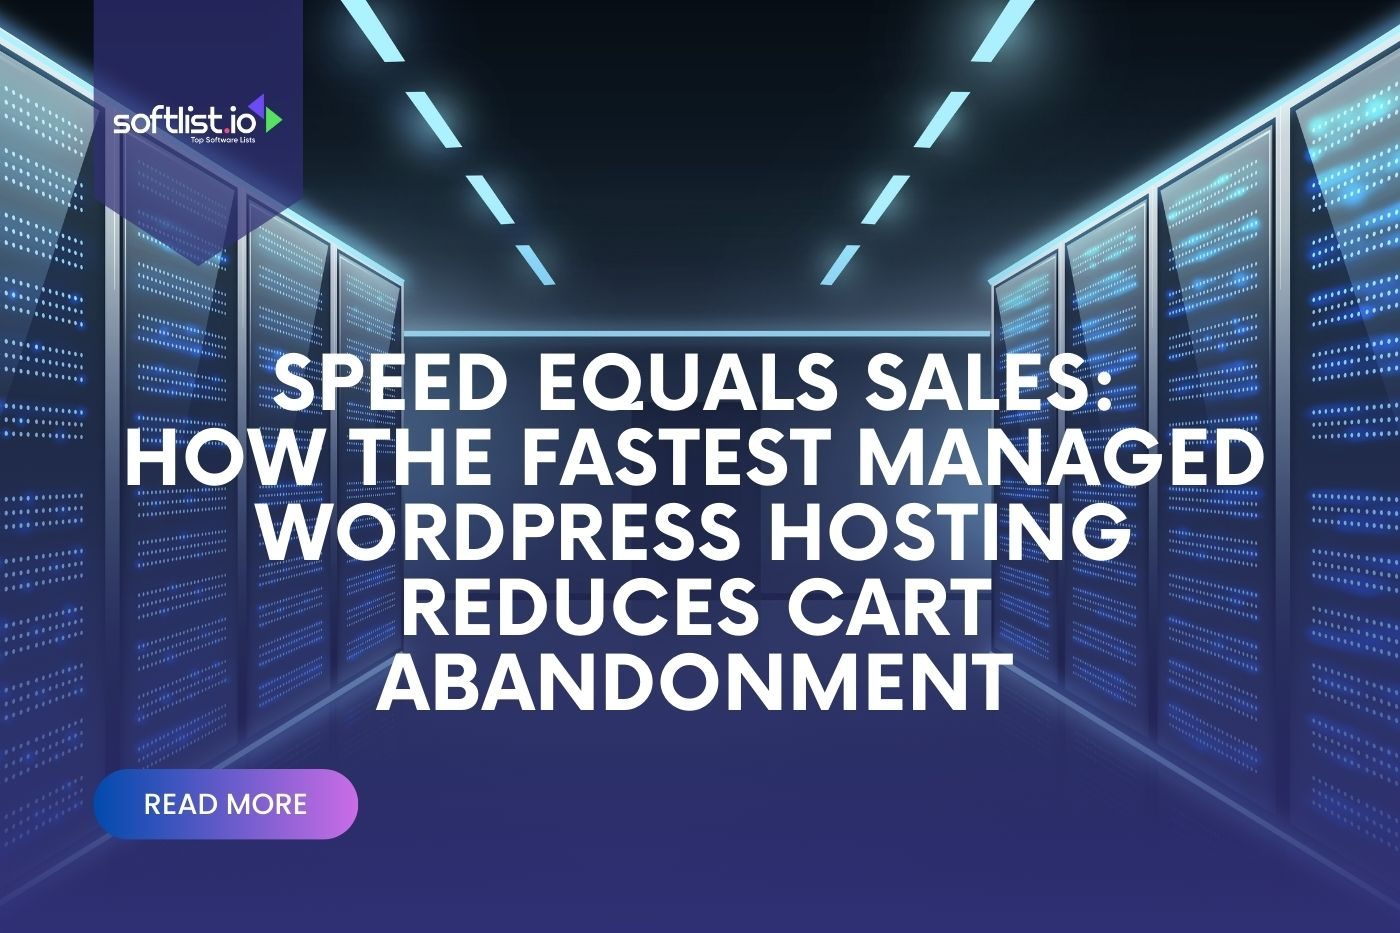 Speed Equals Sales How the Fastest Managed WordPress Hosting Reduces Cart Abandonment